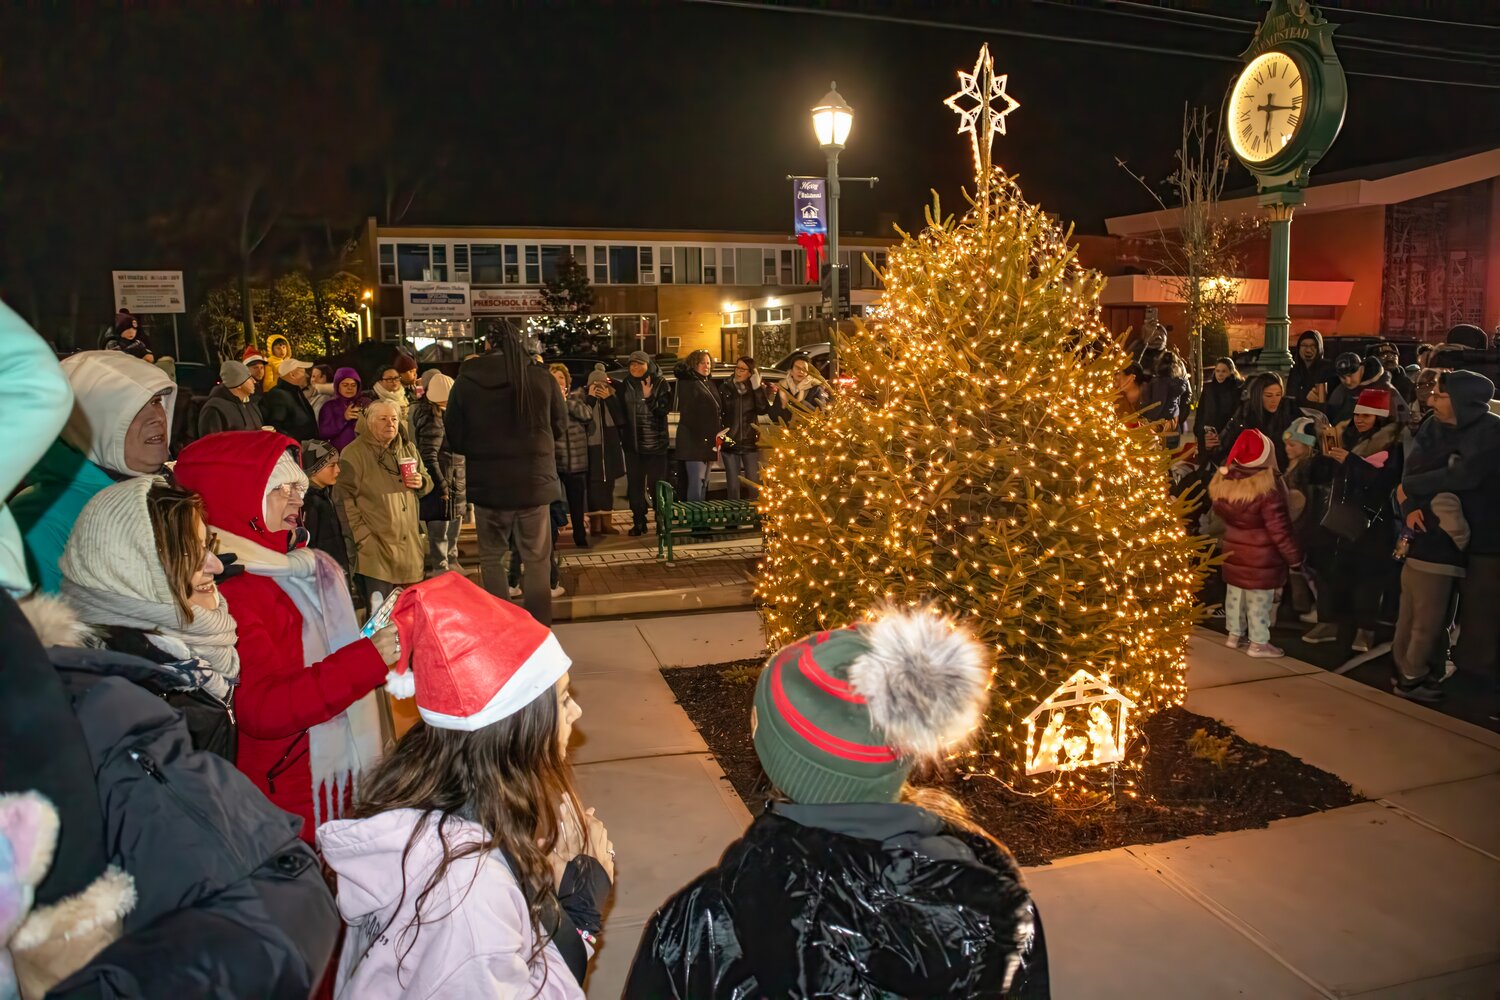 Pine Oaks Landscape Design and Maintenance donated the tree, which has been permanently planted at the Lidl shopping center in Franklin Square that was lit up for the holidays on Nov. 25.